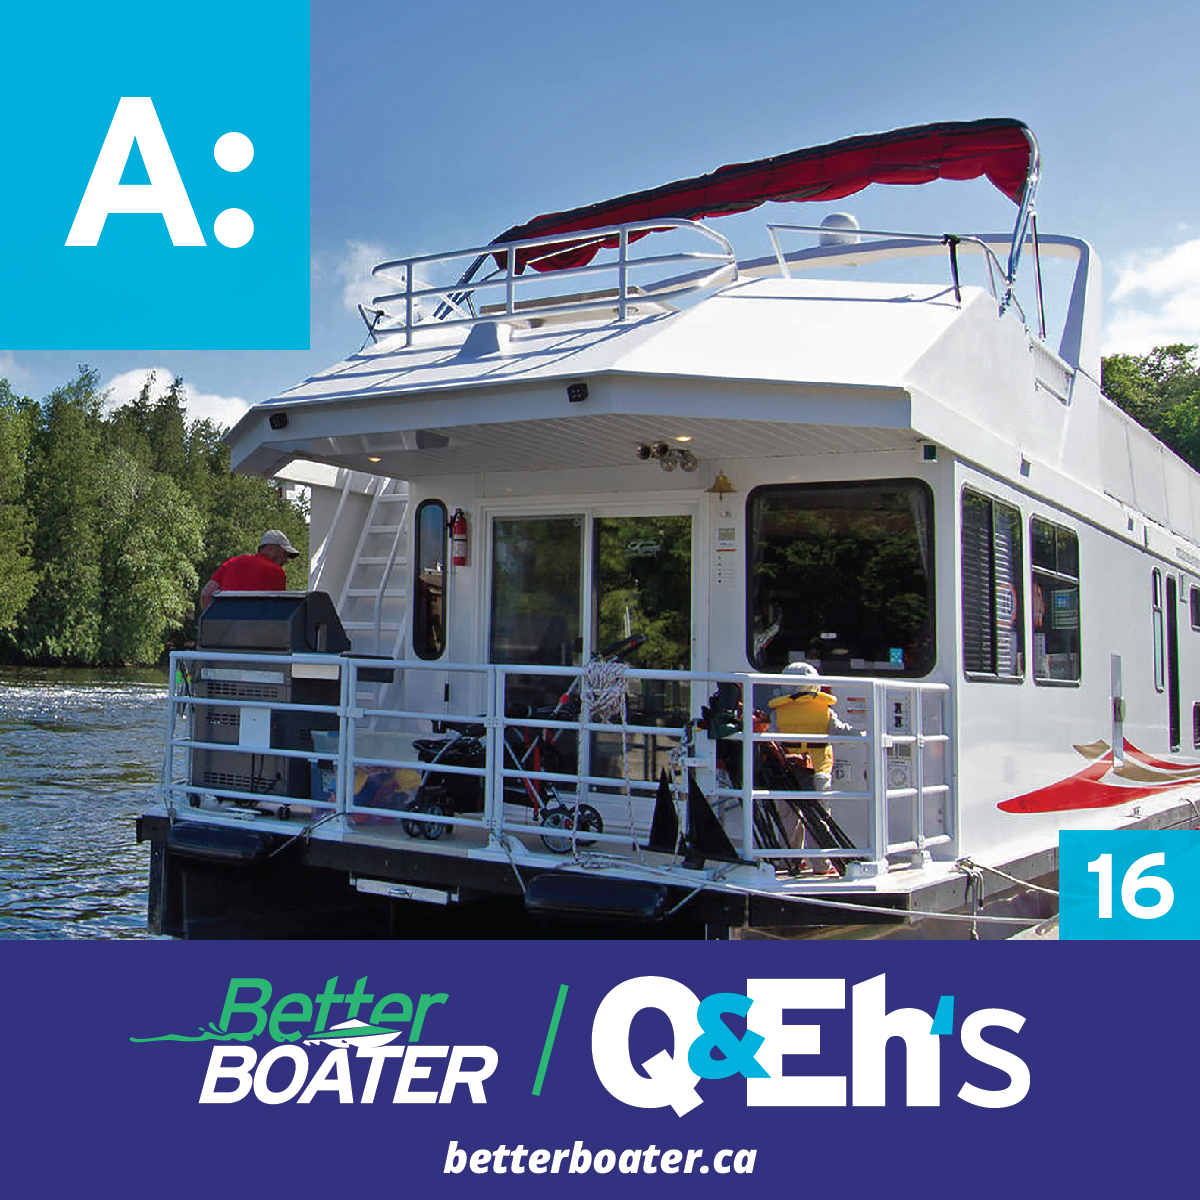 https://betterboater.ca/Alcohol%20Underway